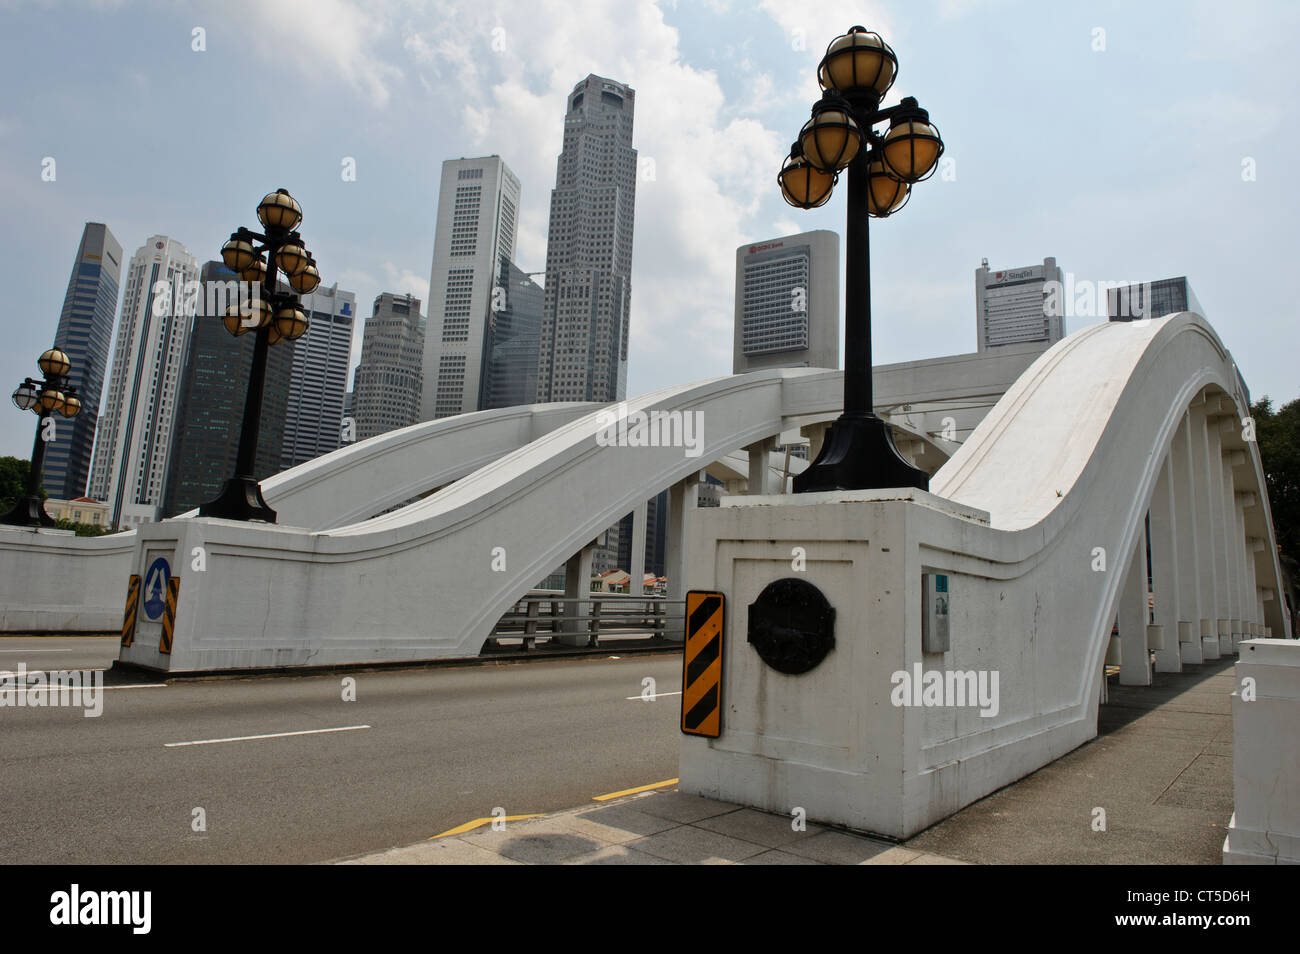 Elgin Bridge in front of the skyline of the financial district, Singapore, Southeast Asia. Stock Photo